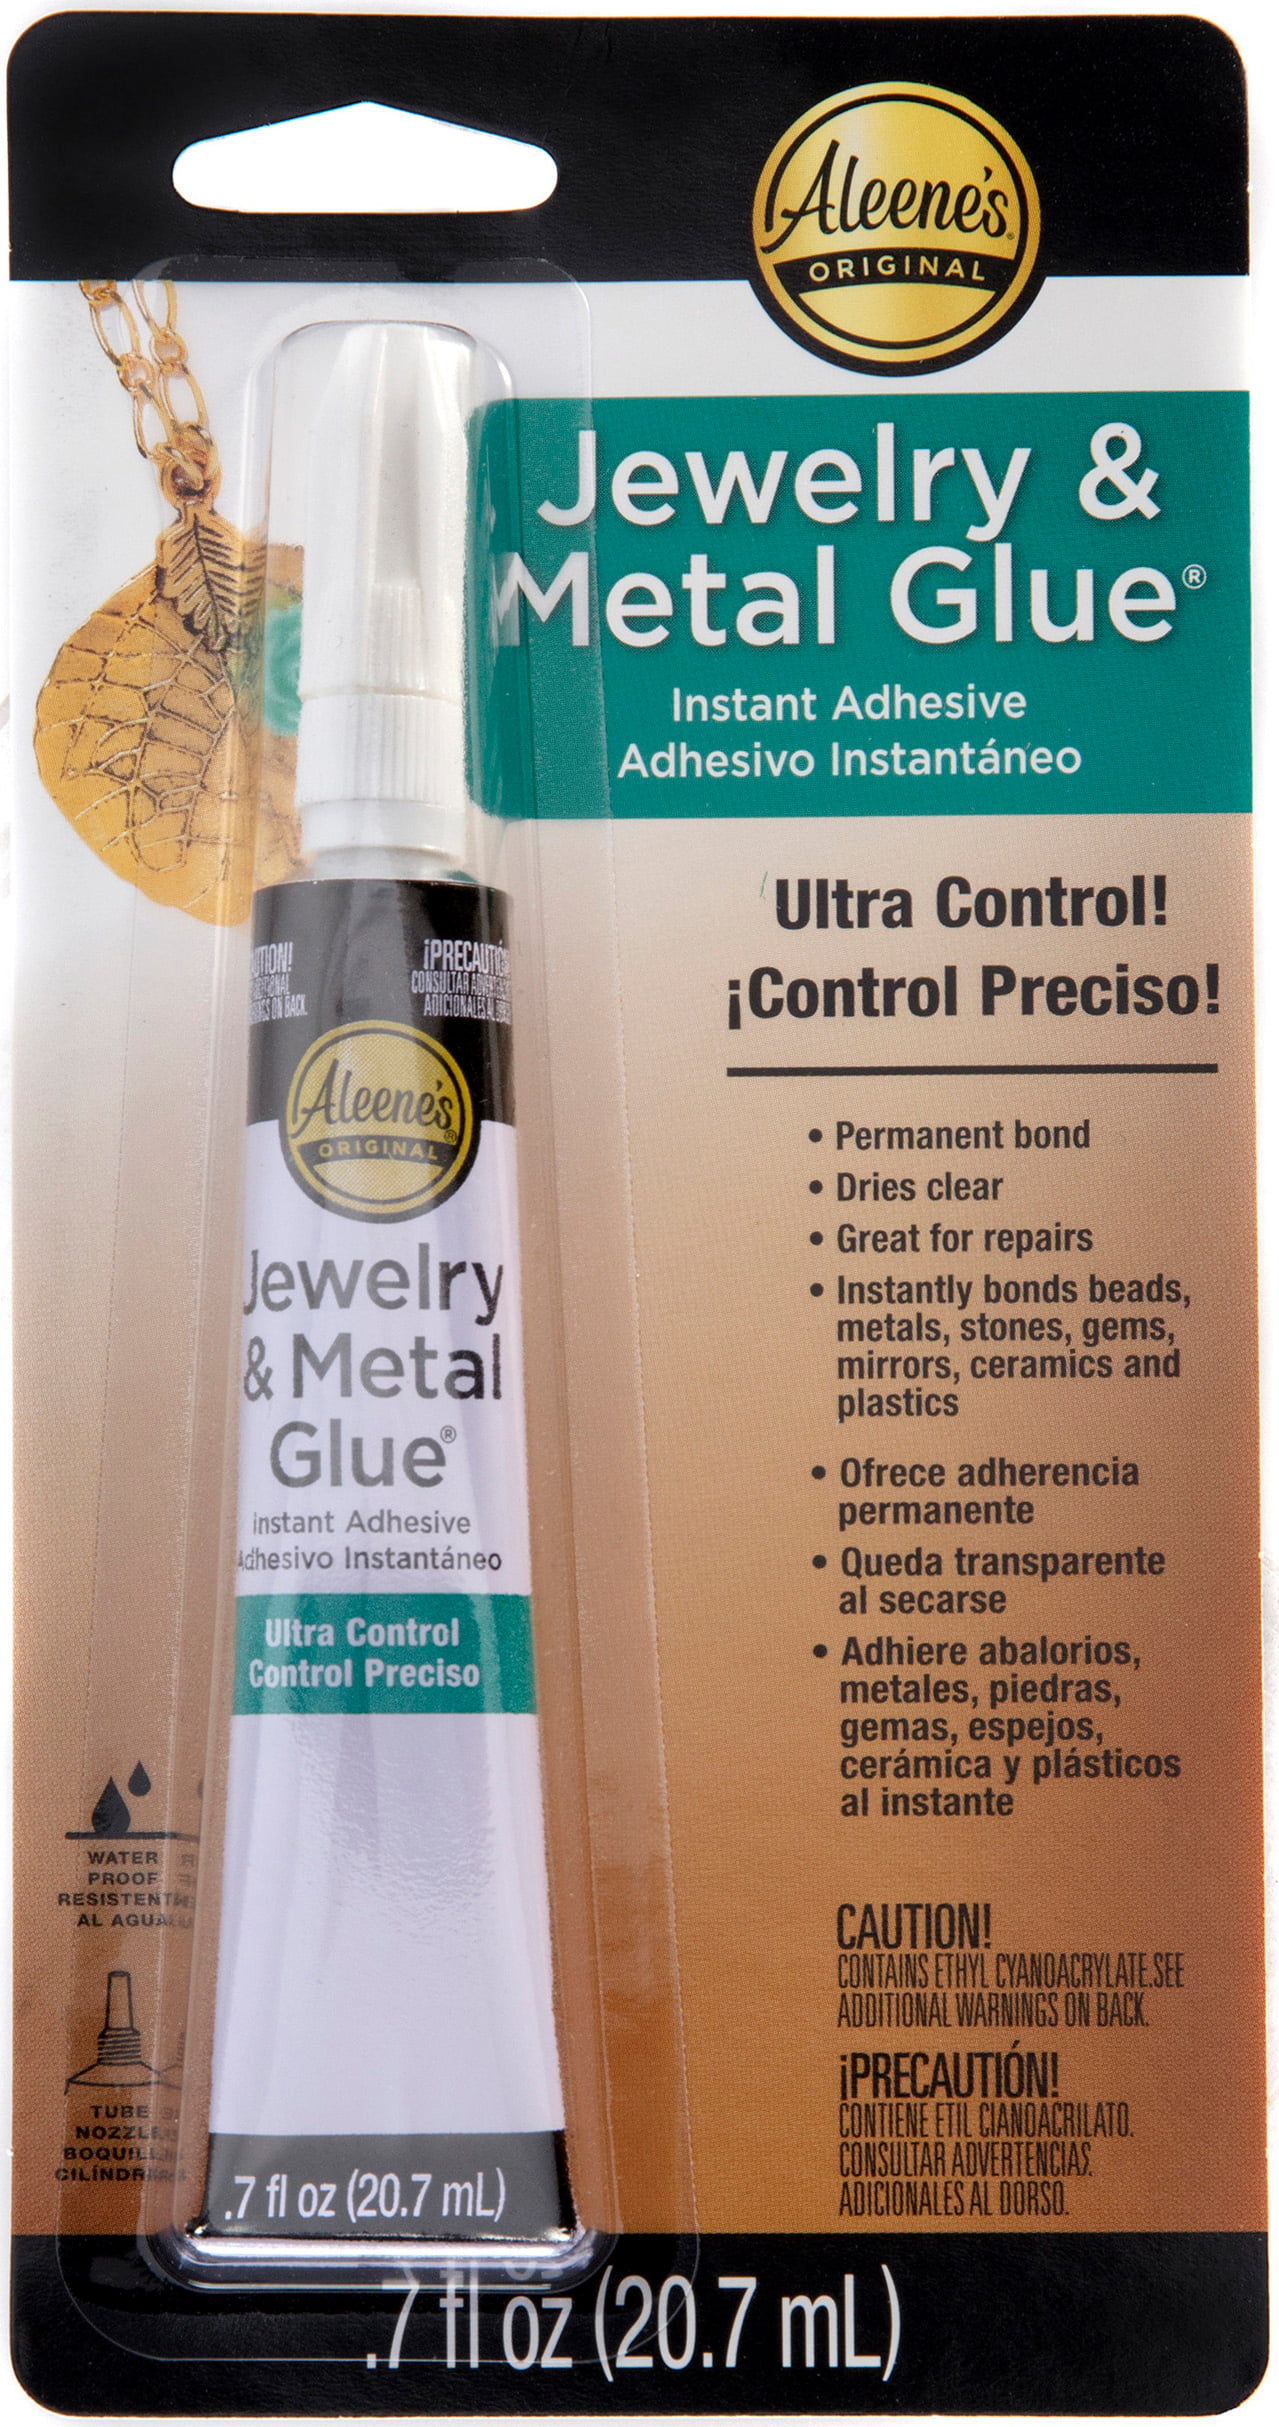 How To Get Jewelry And Metal Glue Off Skin